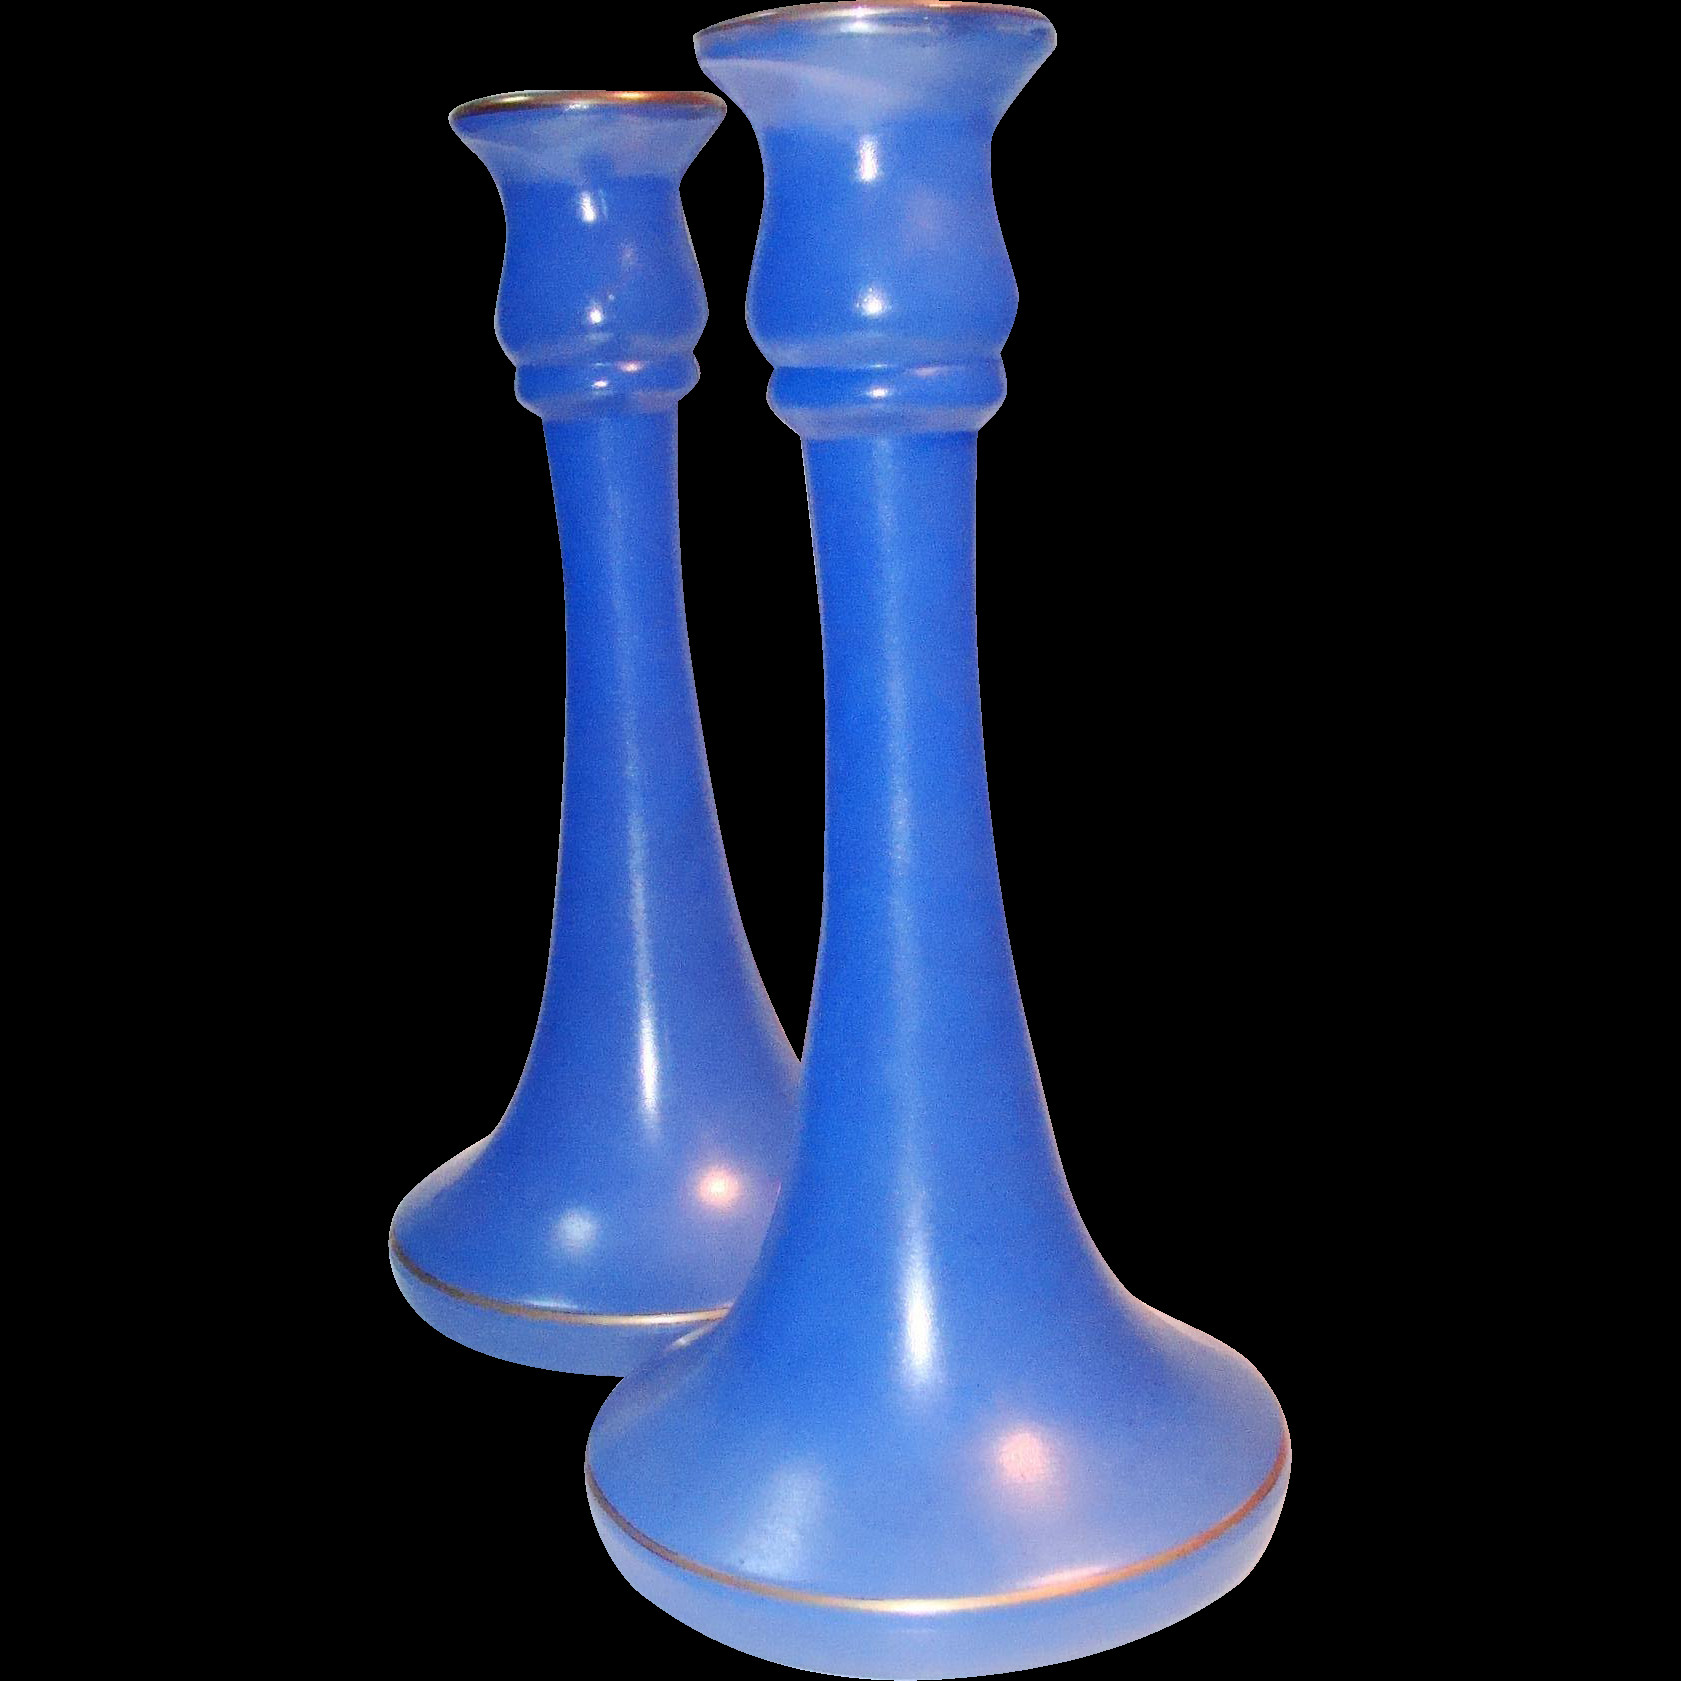 27 Unique Tall Cobalt Blue Glass Vase 2024 free download tall cobalt blue glass vase of cool blue frosted glass candlesticks pair 9 tall in cool blue glass candlesticks a pair to use on your table to make you at least feel cool in summer